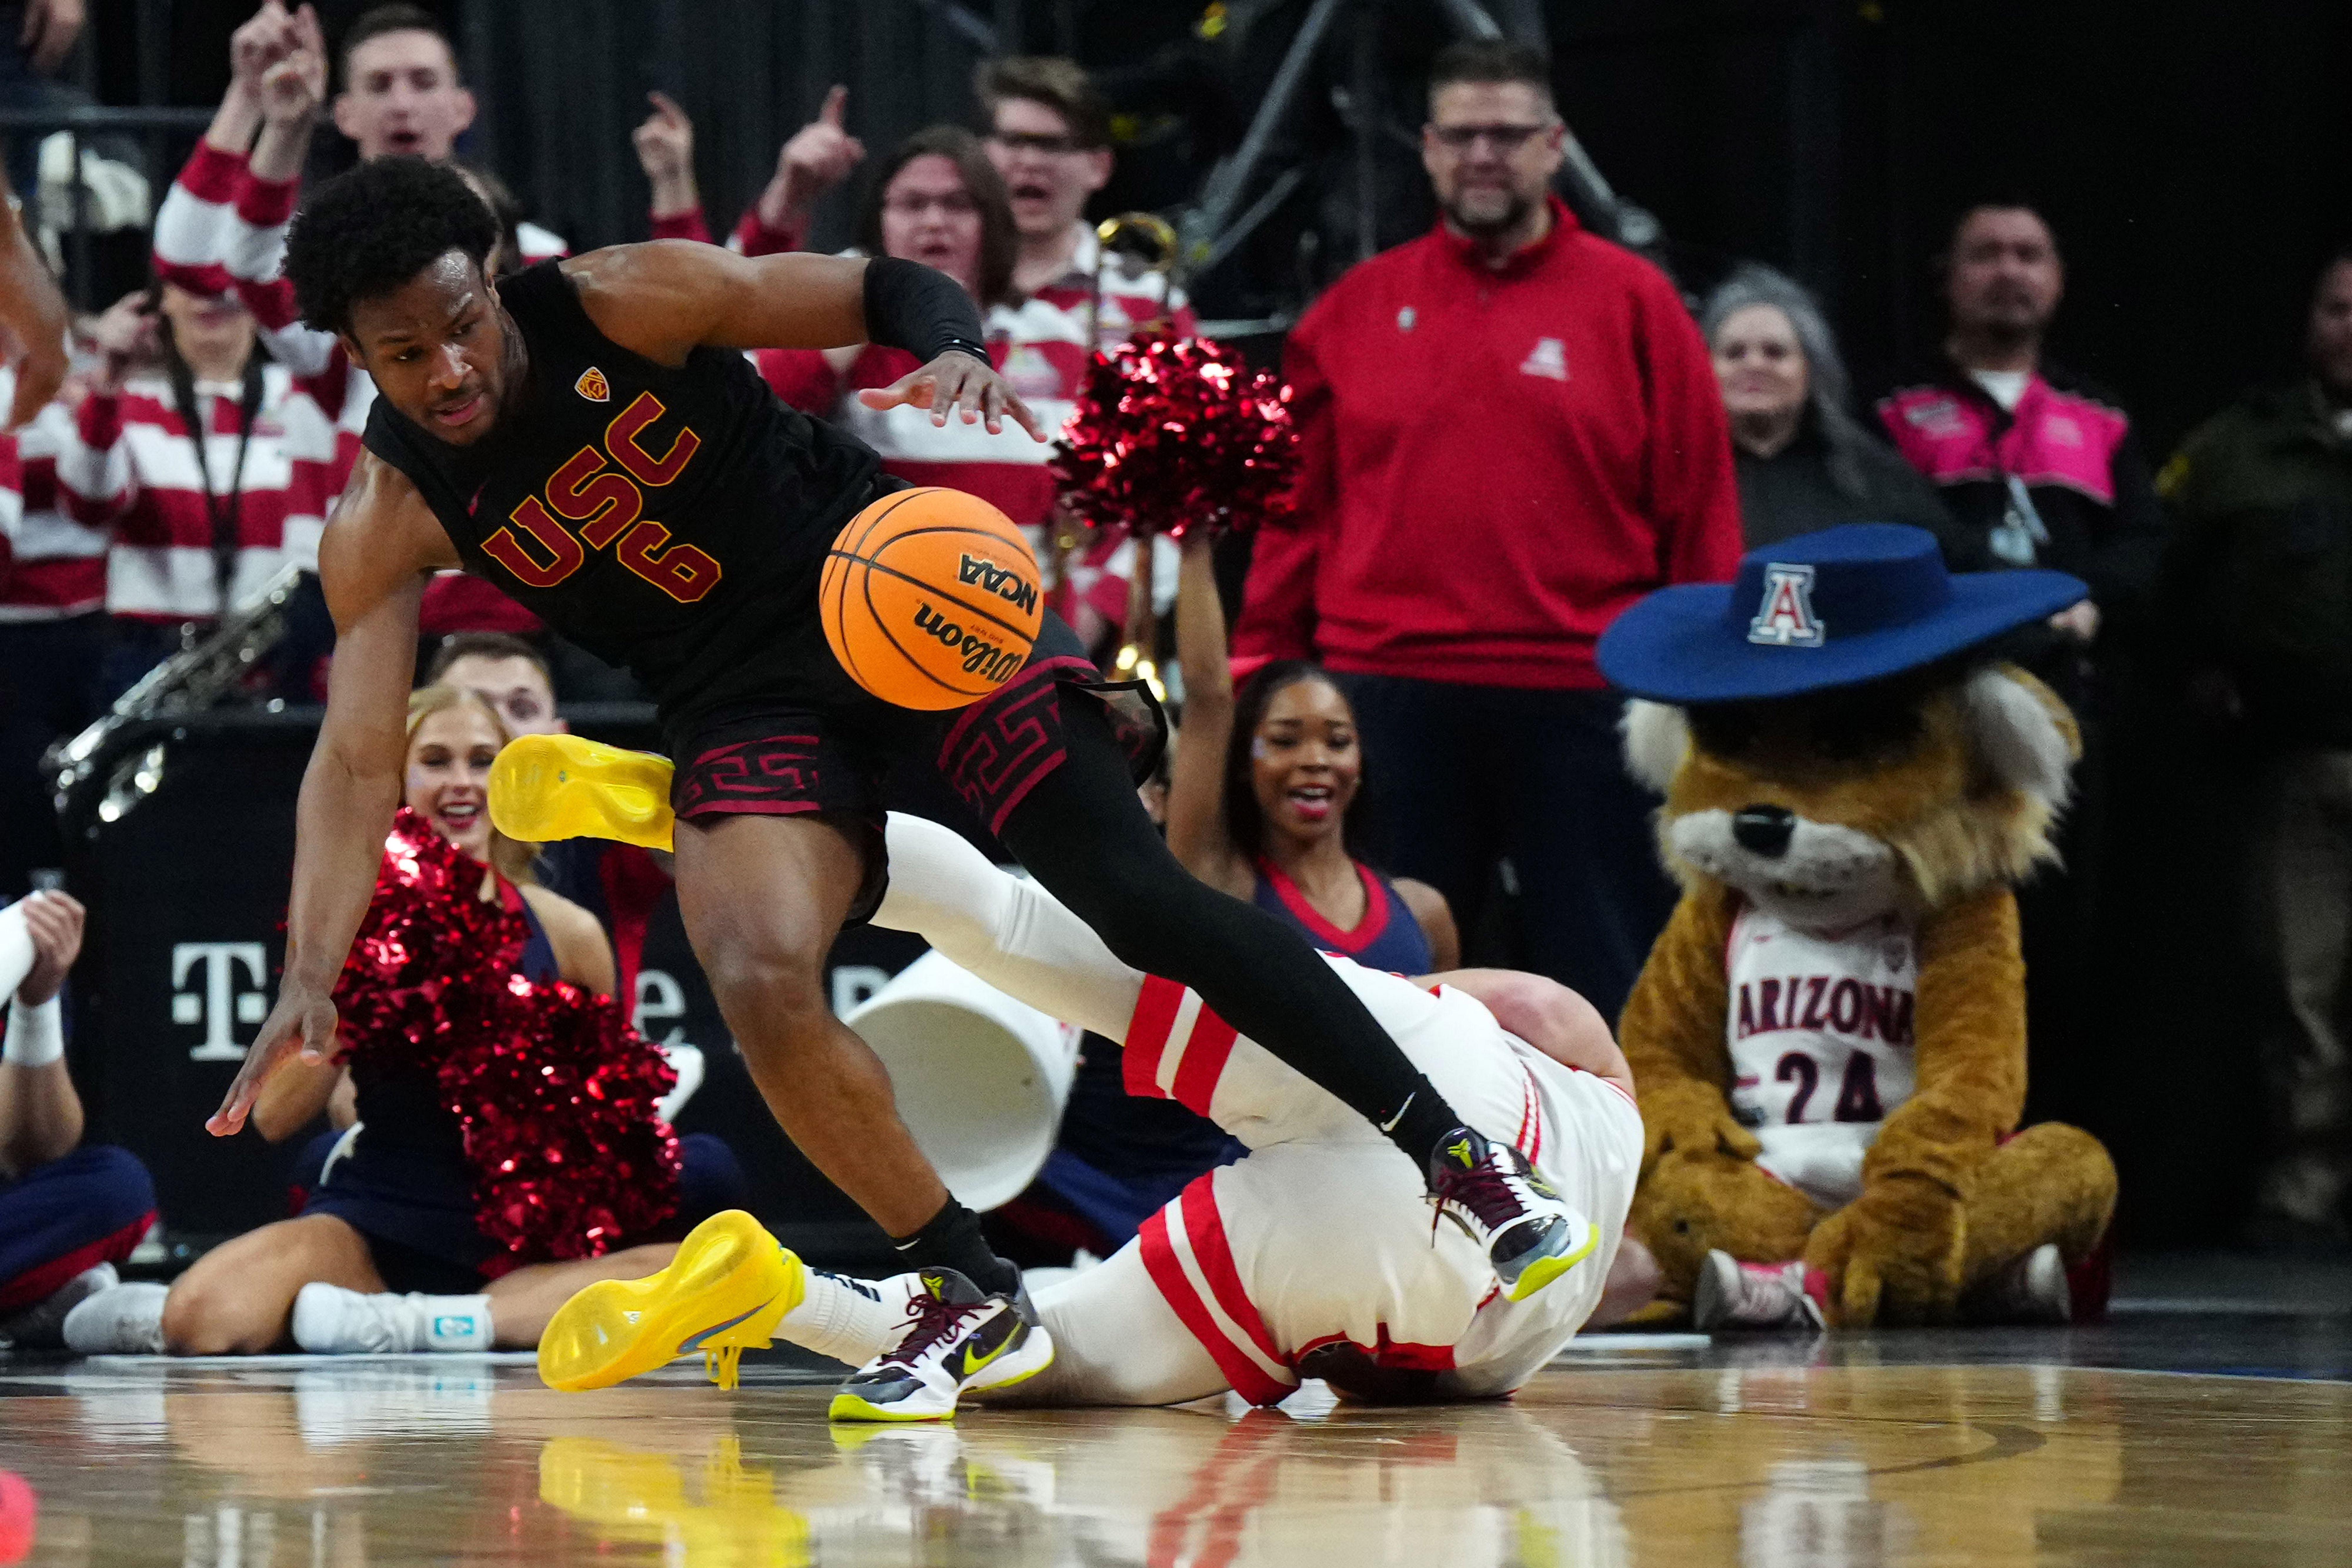 Bronny James hustles for the loose ball in a Pac-12 Tournament game.